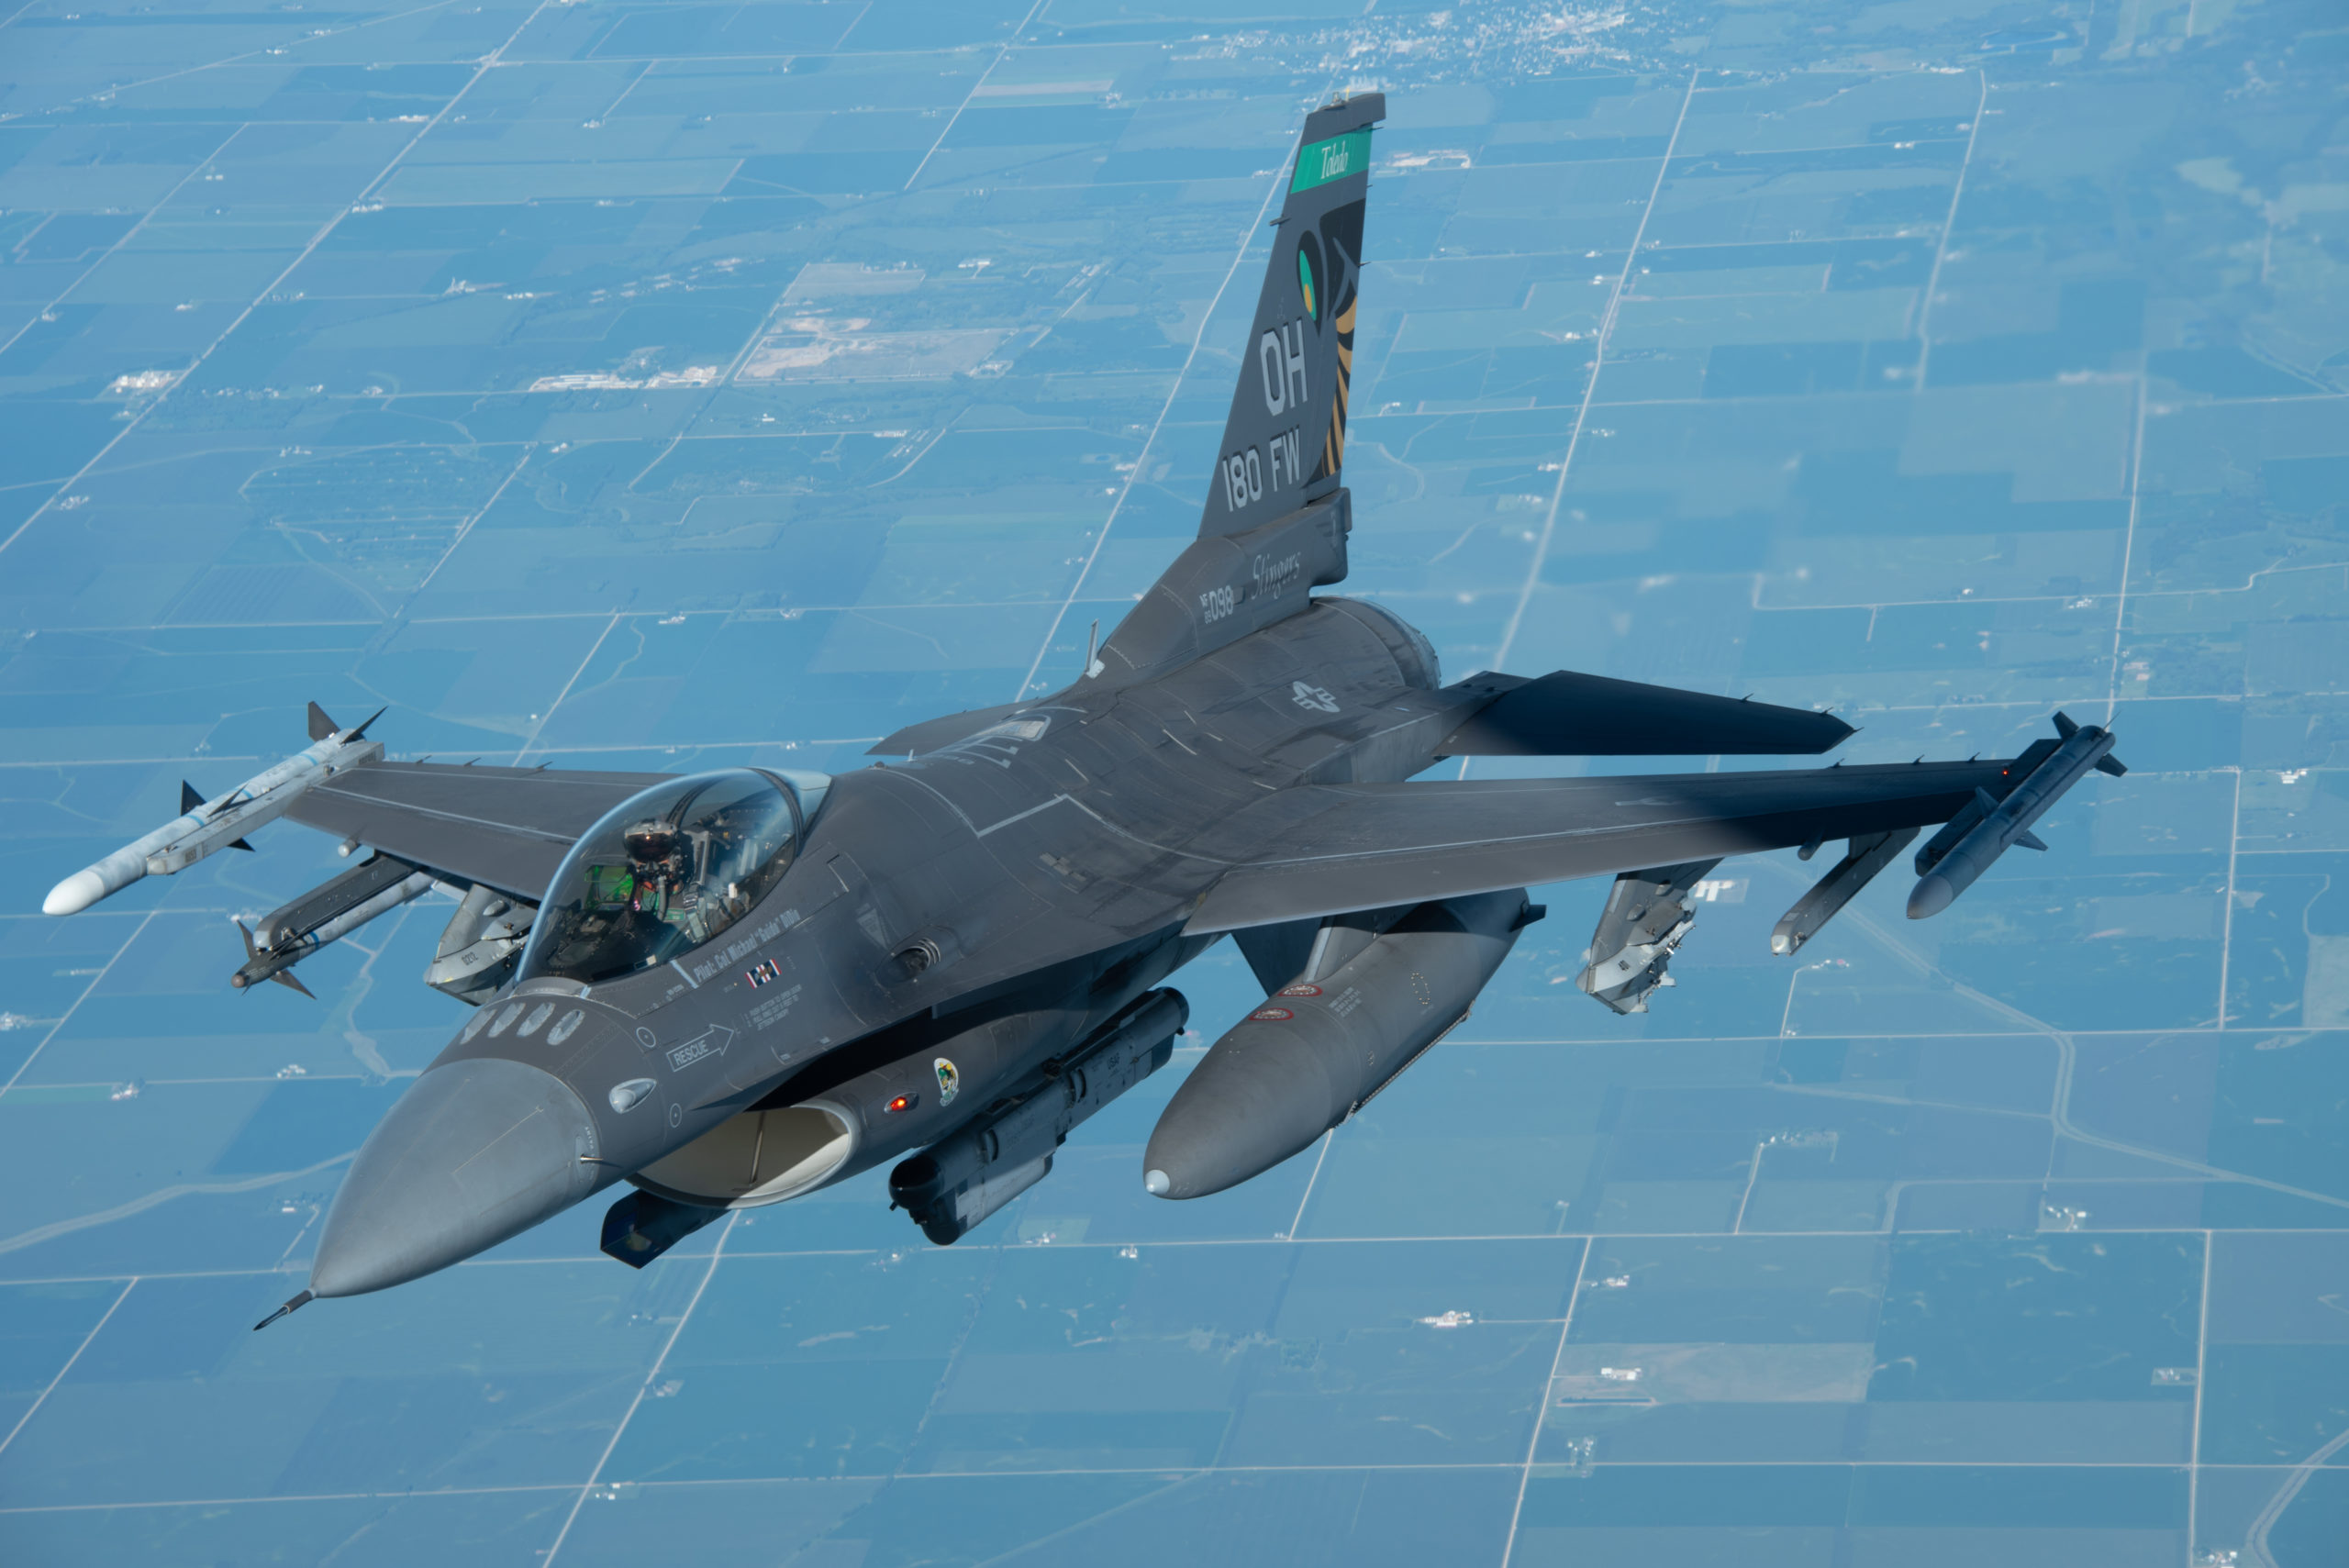 A U.S. Air Force F-16 Fighting Falcon of the Ohio Air National Guard’s 180th Fighter Wing flies over Iowa Aug. 11, 2022. The F-16 was on its way to the Field of Dreams Major League Baseball game to perform a flyover during the playing of the US National Anthem. (U.S. Air National Guard photo by Airman 1st Class Tylon Chapman)